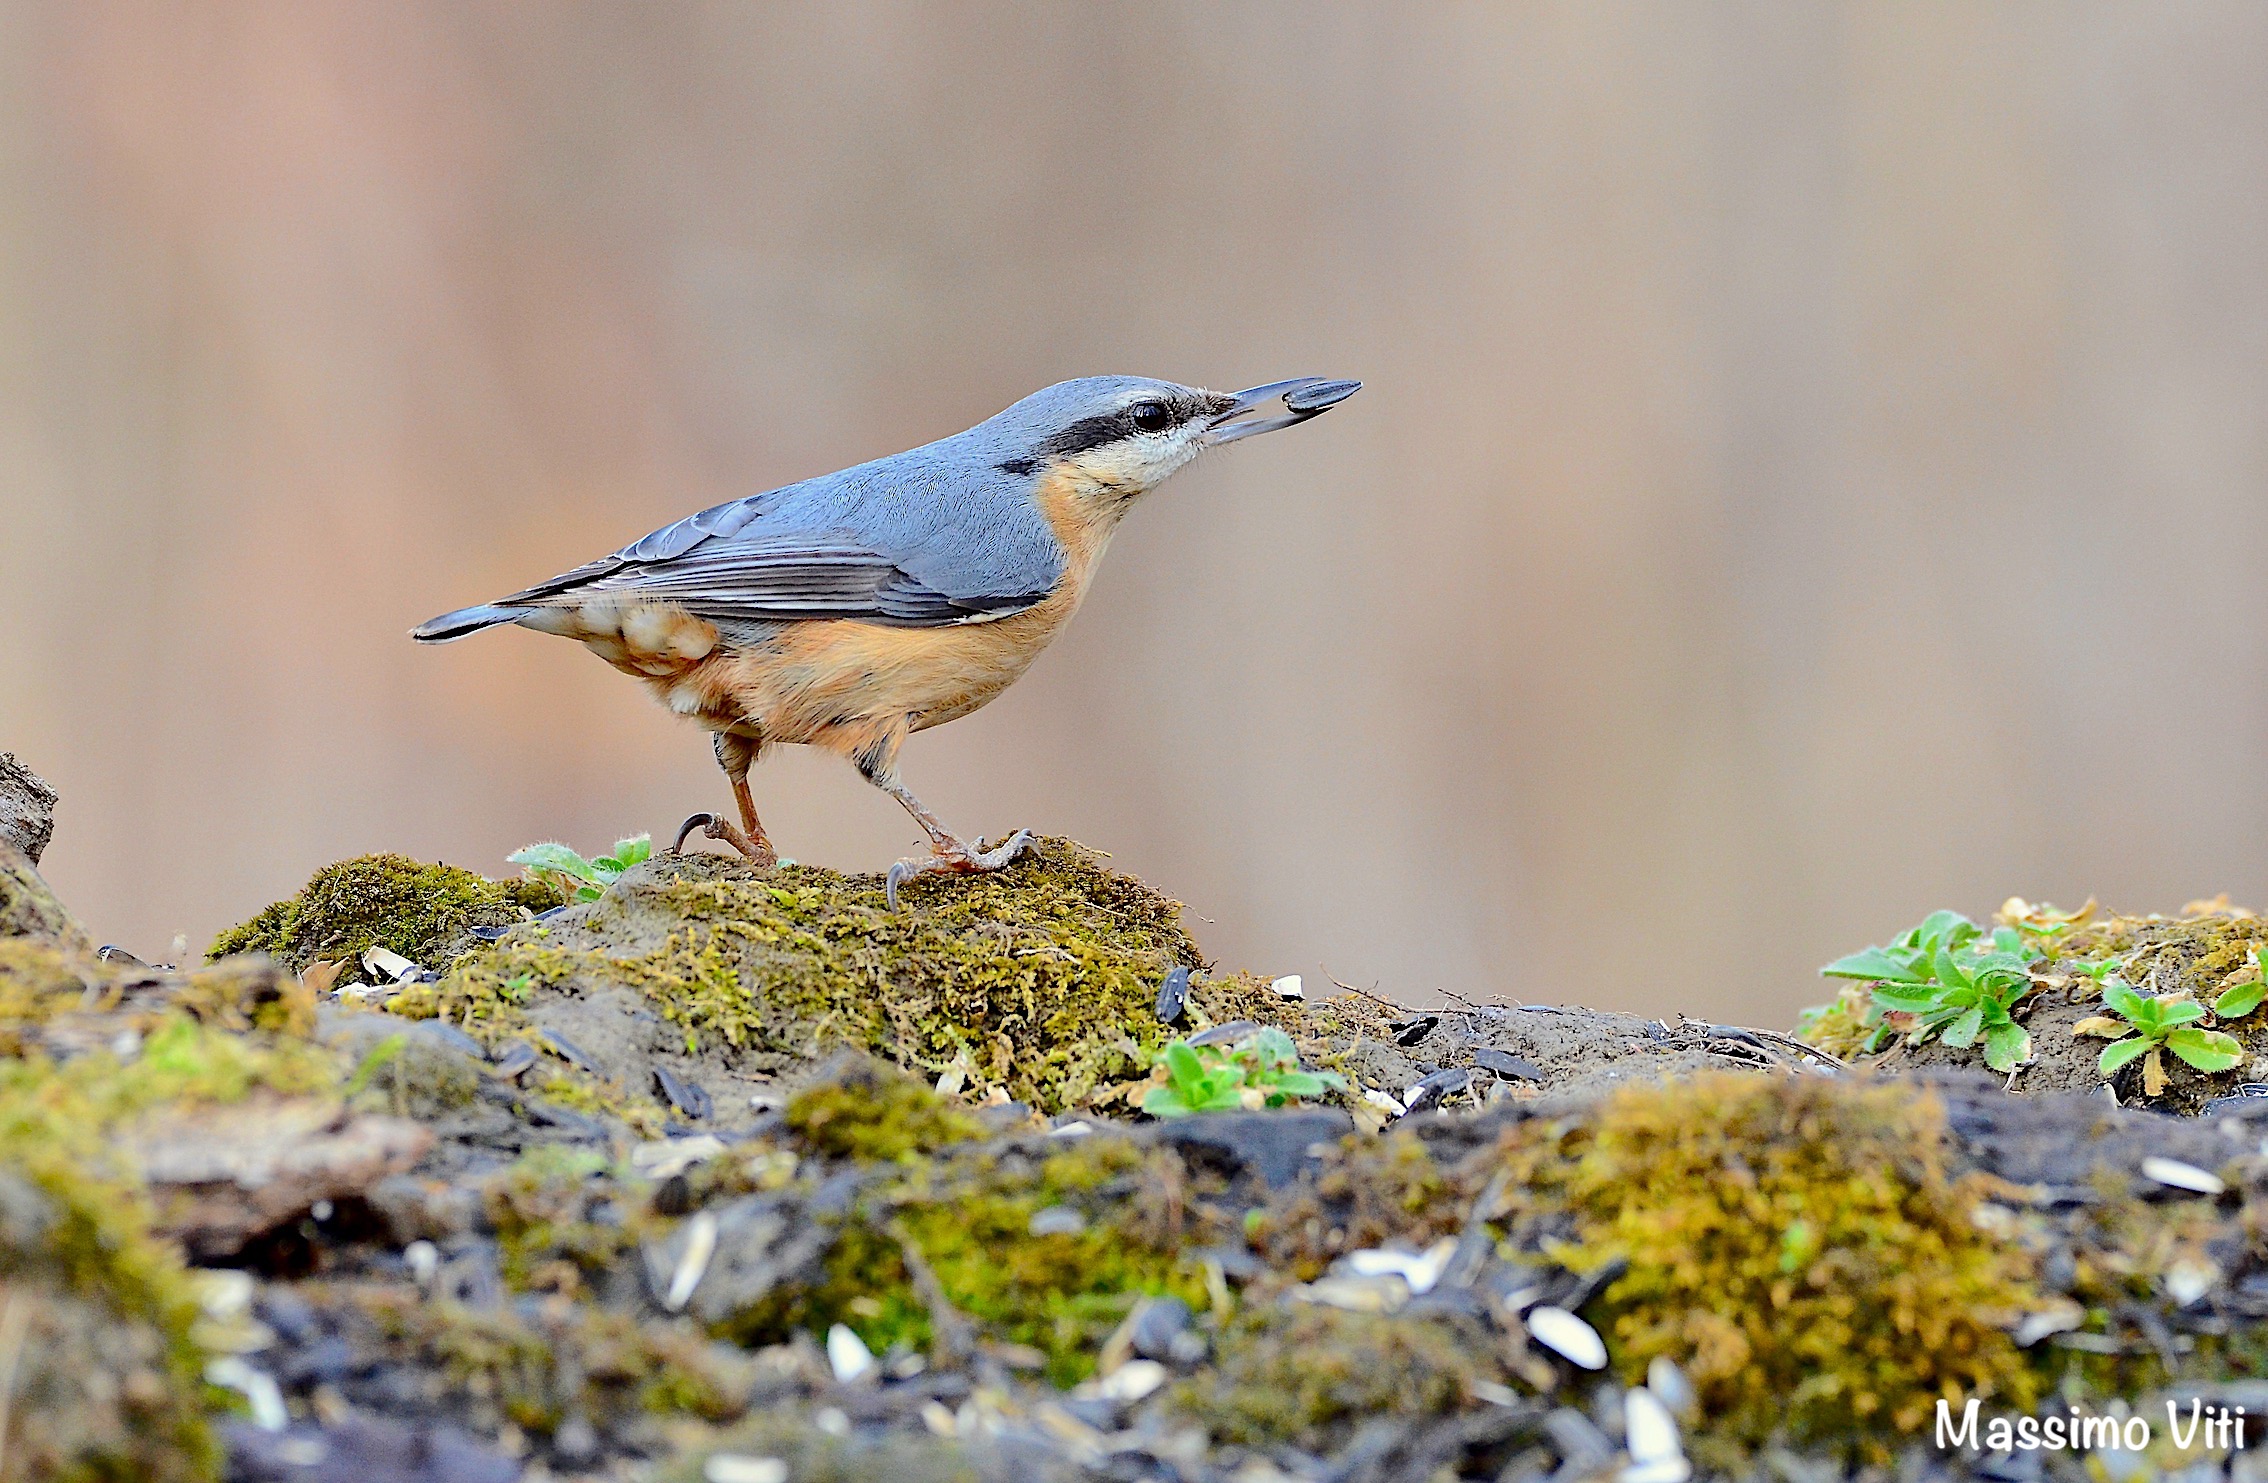 "The meal of the Nuthatch"...